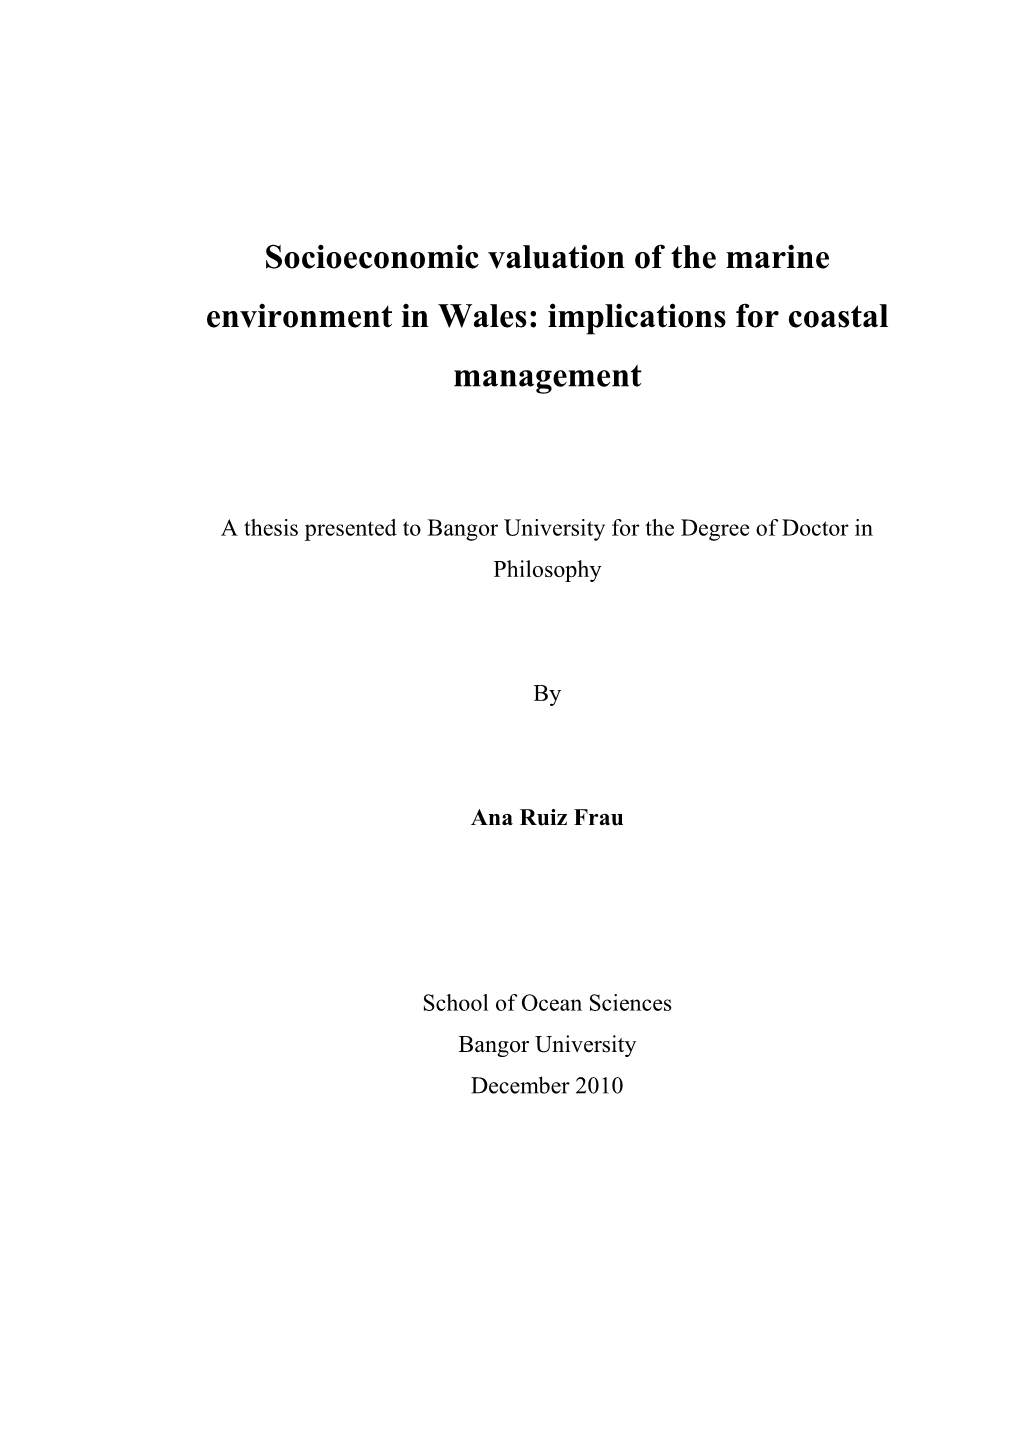 Socioeconomic Valuation of the Marine Environment in Wales: Implications for Coastal Management